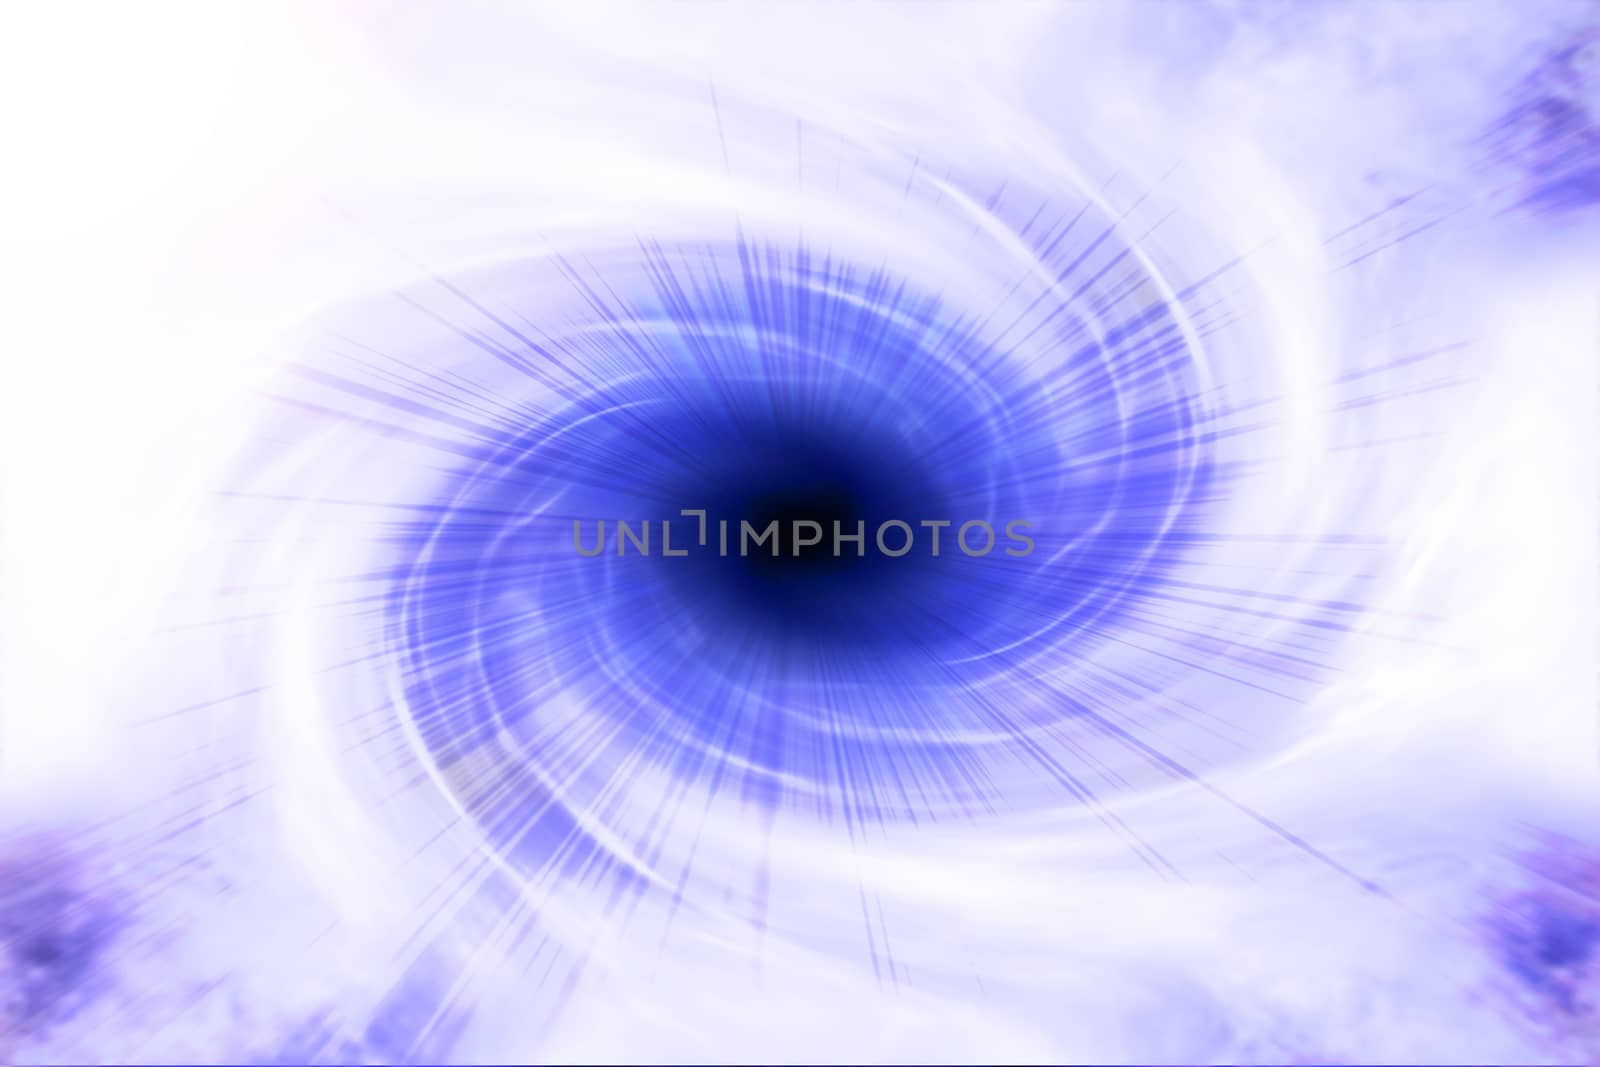 Space hole by photosampler